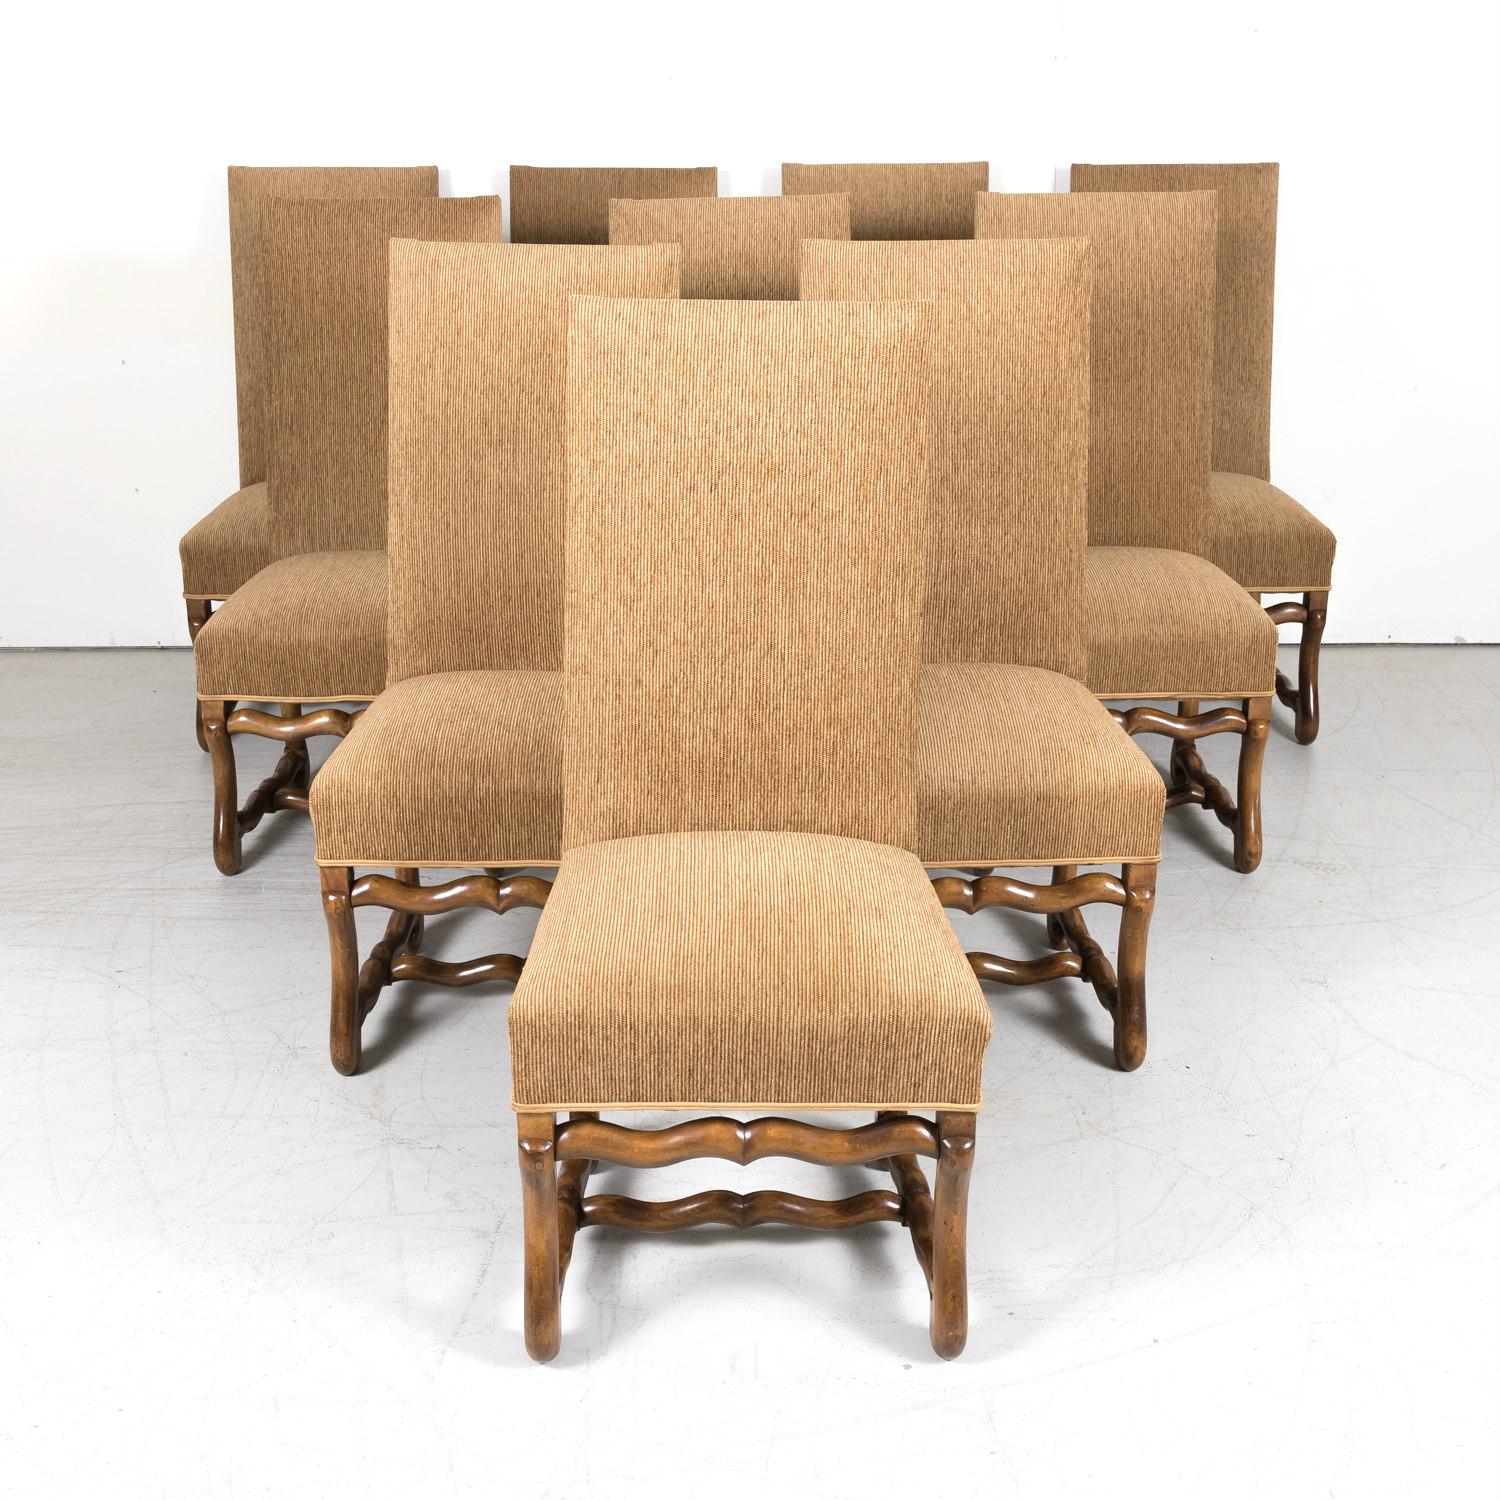 An elegant set of 10 French Louis XIII style os de mouton dining side chairs, having beautifully carved walnut frames with high rectangular backs and supported on os de mouton or sheep bone legs with stretcher, circa 1920s. These large and